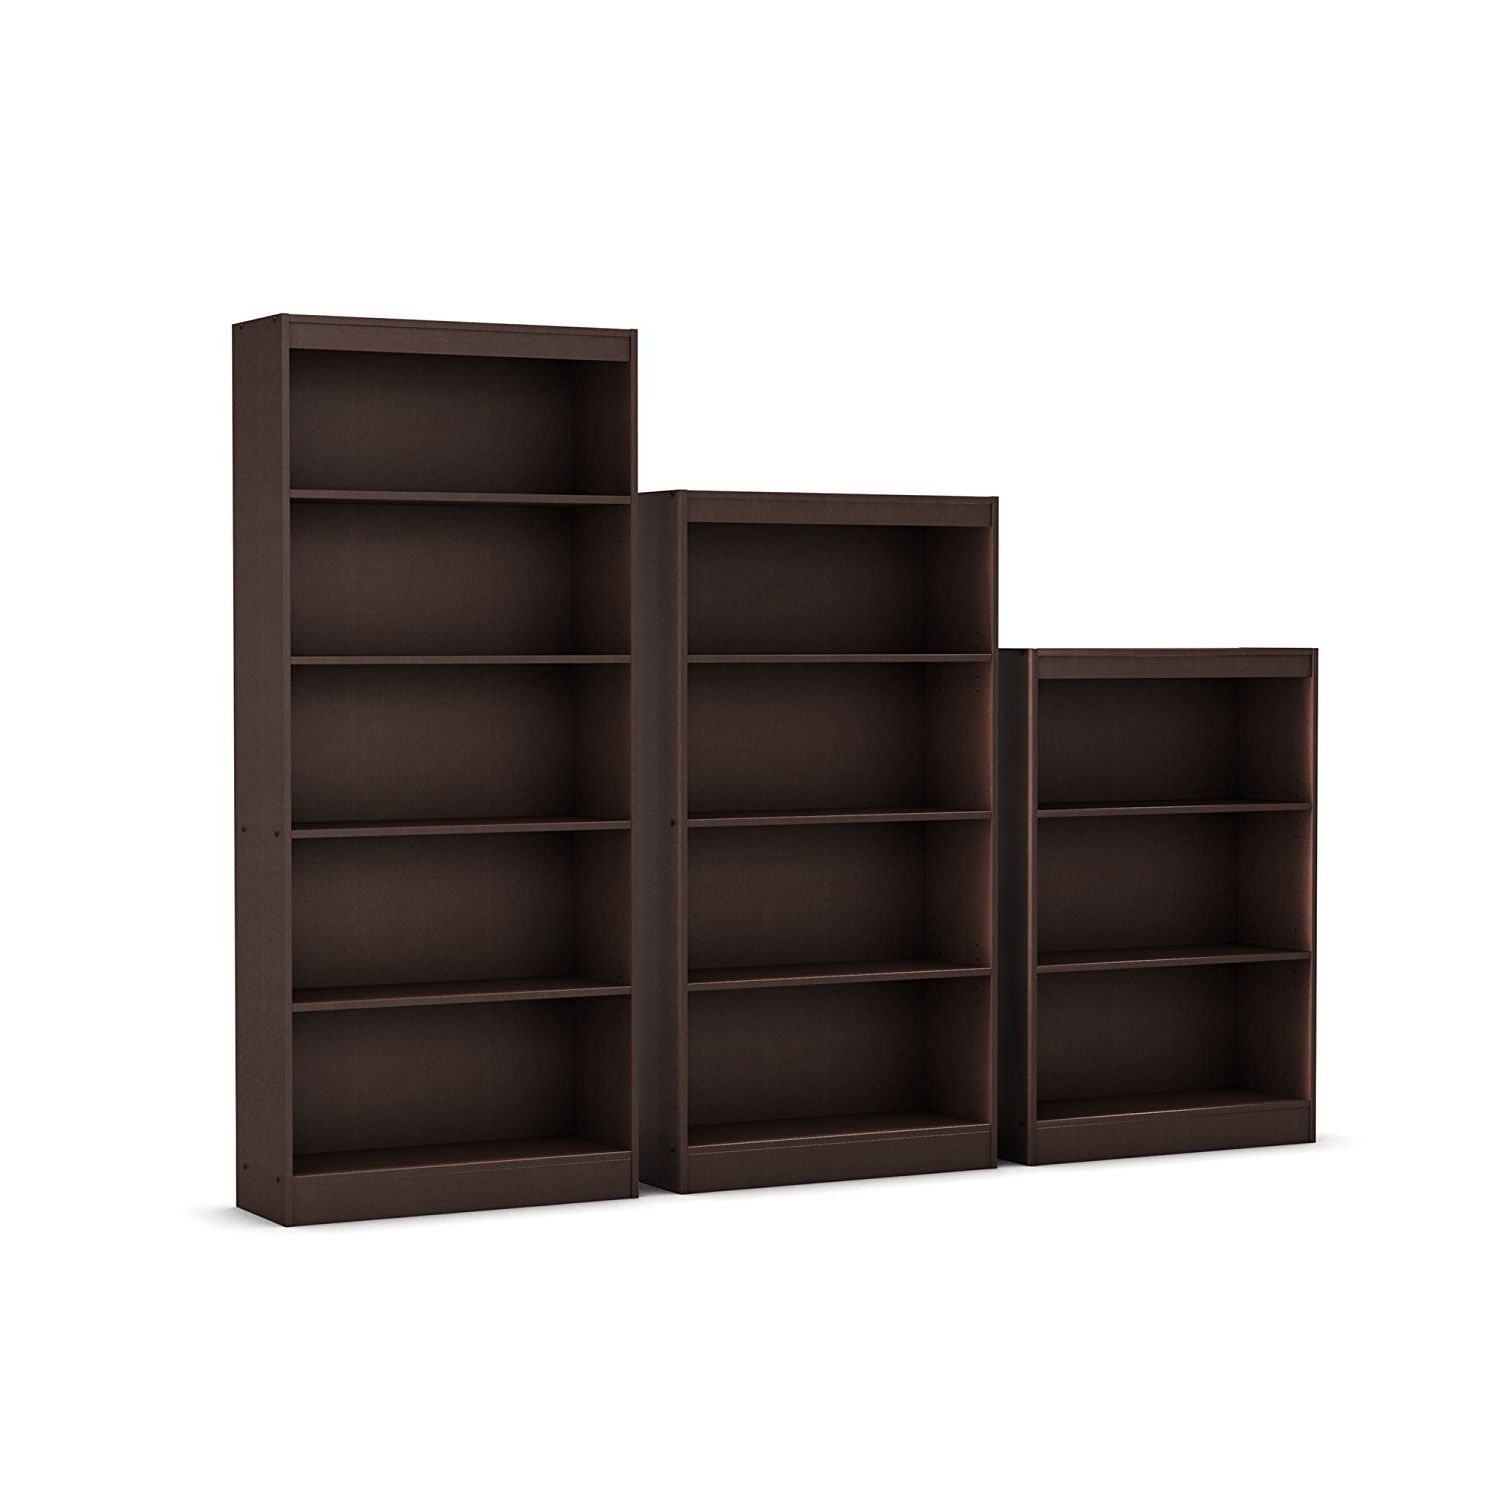 Widely Used South Shore Axess Collection 5 Shelf Bookcases In Amazon: South Shore Axess Collection 5 Shelf Bookcase (View 12 of 15)